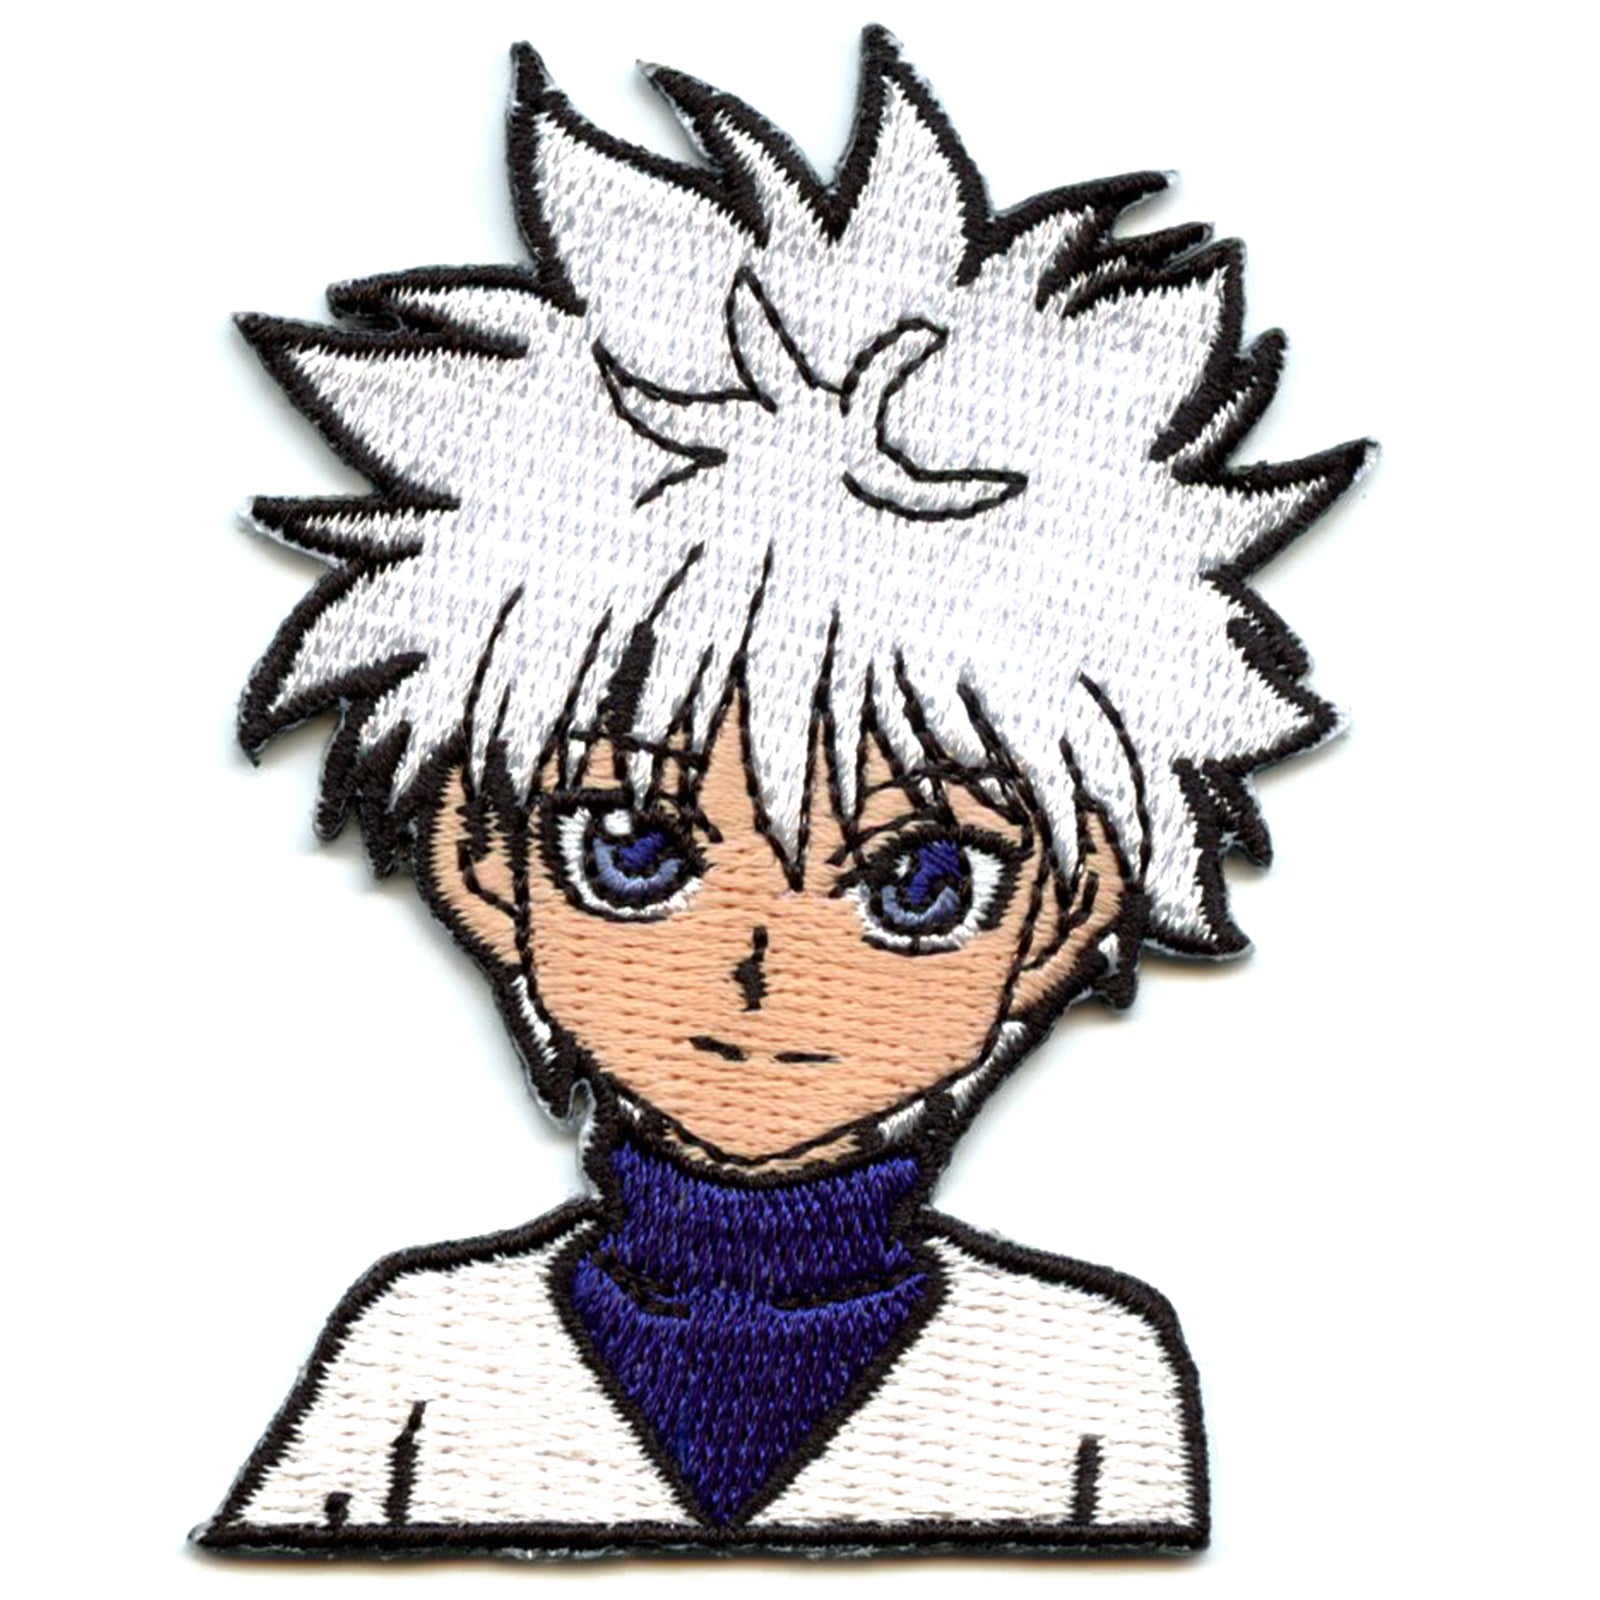 Riapawel Naruto My Hero Academia Embroidered Iron on Patches, Anime  Embroidery Sew on Patches Badge Applique - Walmart.com